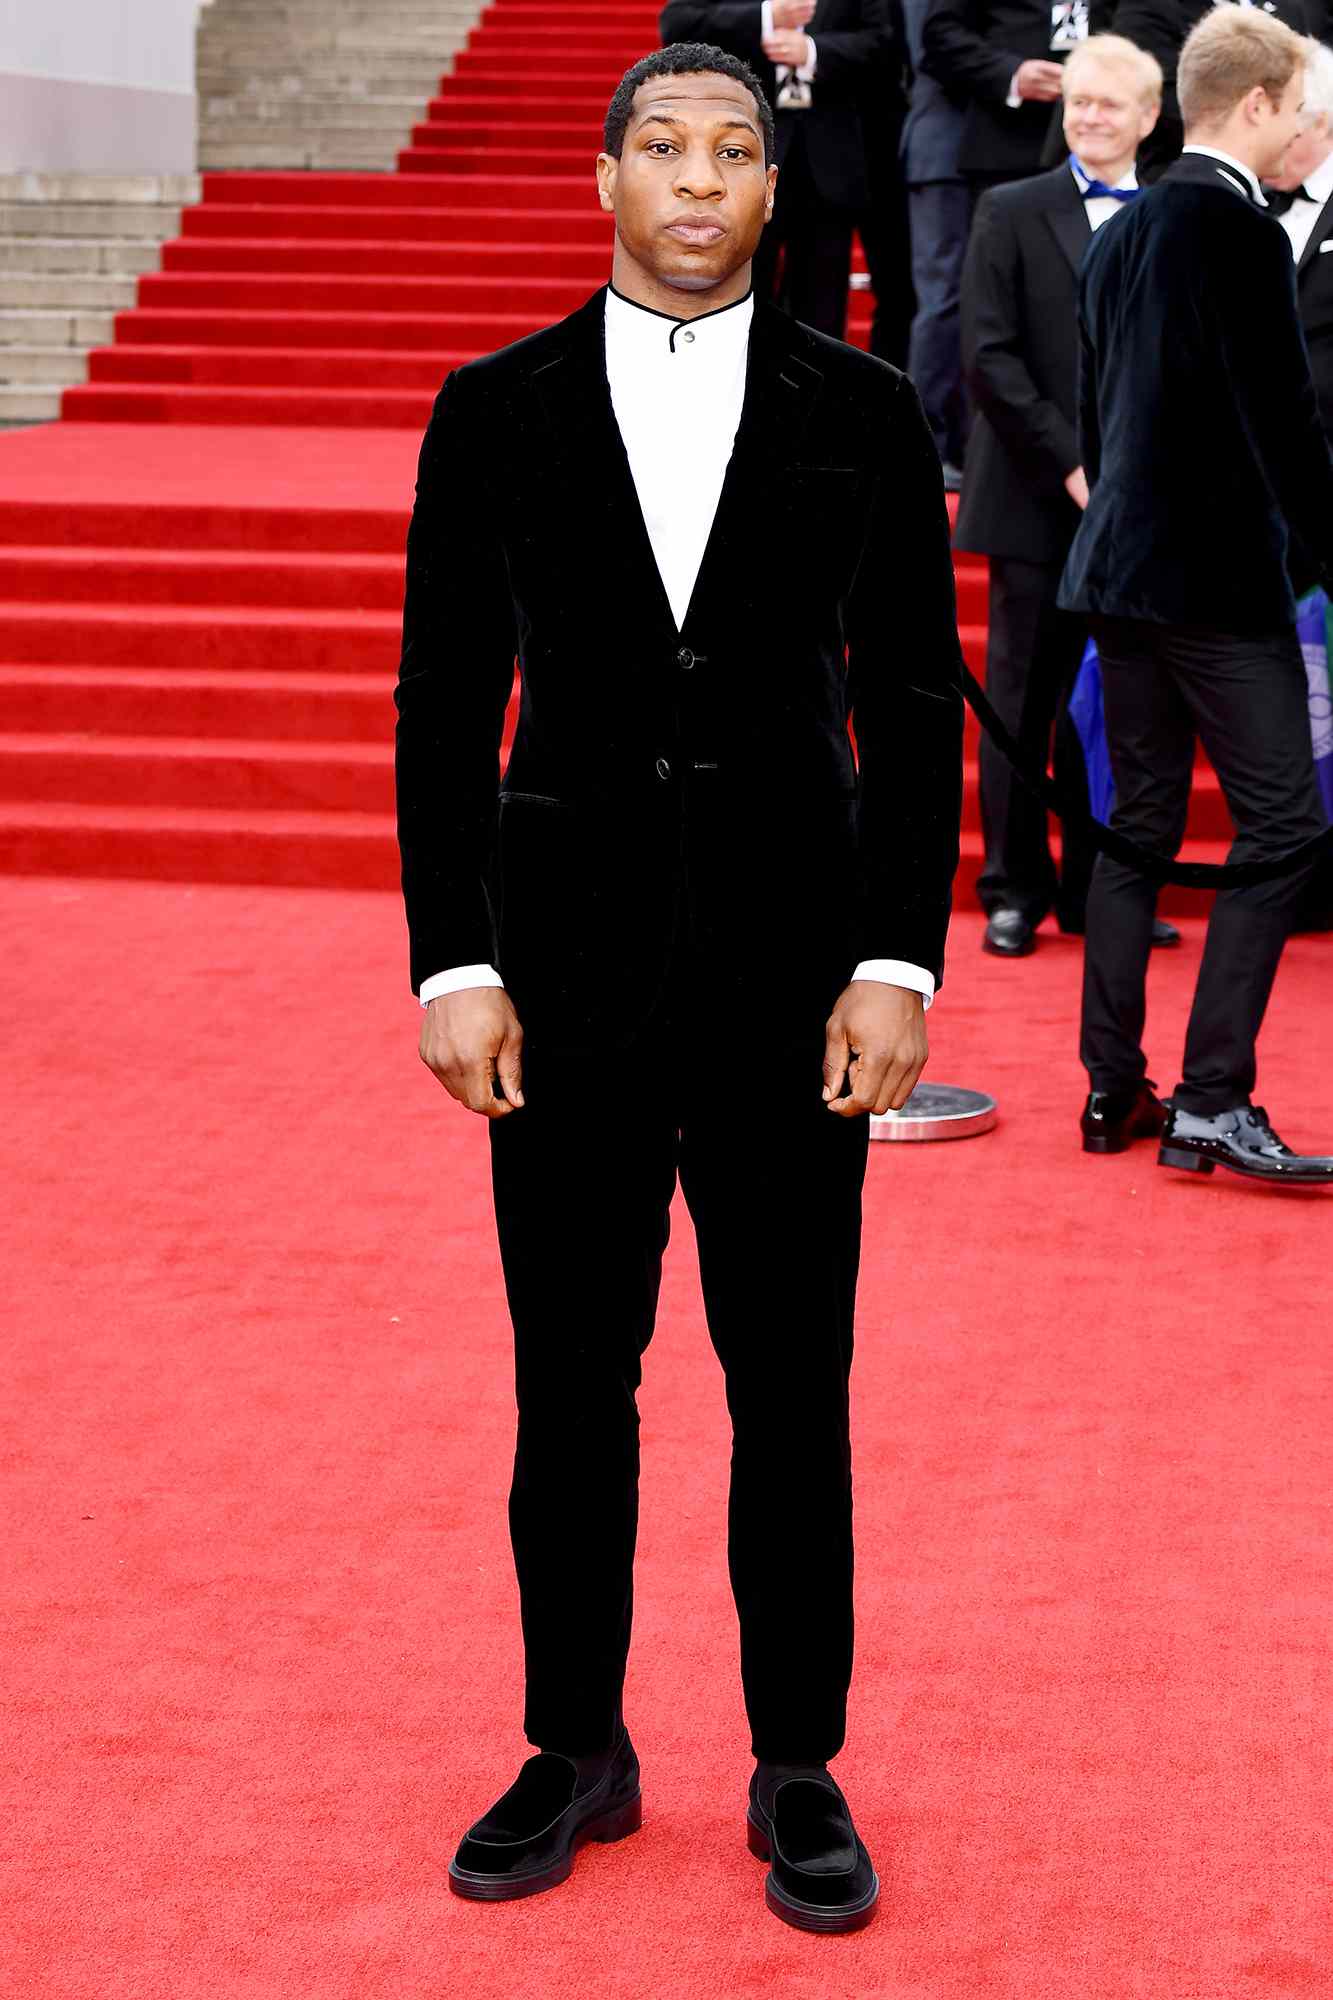 Jonathan Majors attends the World Premiere of "NO TIME TO DIE" at the Royal Albert Hall on September 28, 2021 in London